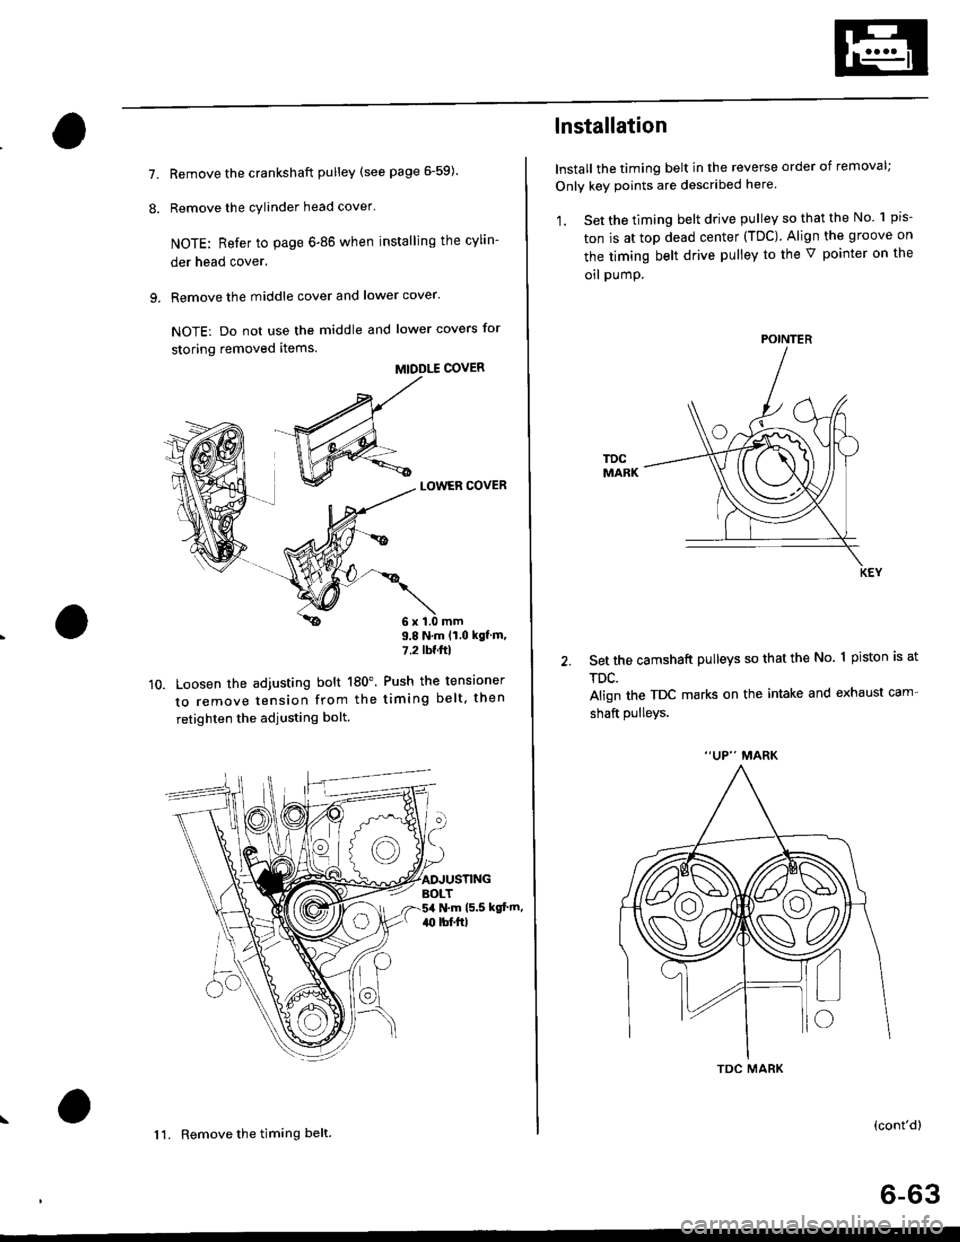 HONDA CIVIC 1998 6.G Workshop Manual 7.
8.
Remove the crankshaft pulley (see page 6-59).
Remove the cylinder head cover
NOTE: Refer to page 6-86 when installing the cylin-
der head cover.
Remove the middle cover and lower cover.
NOTE: D